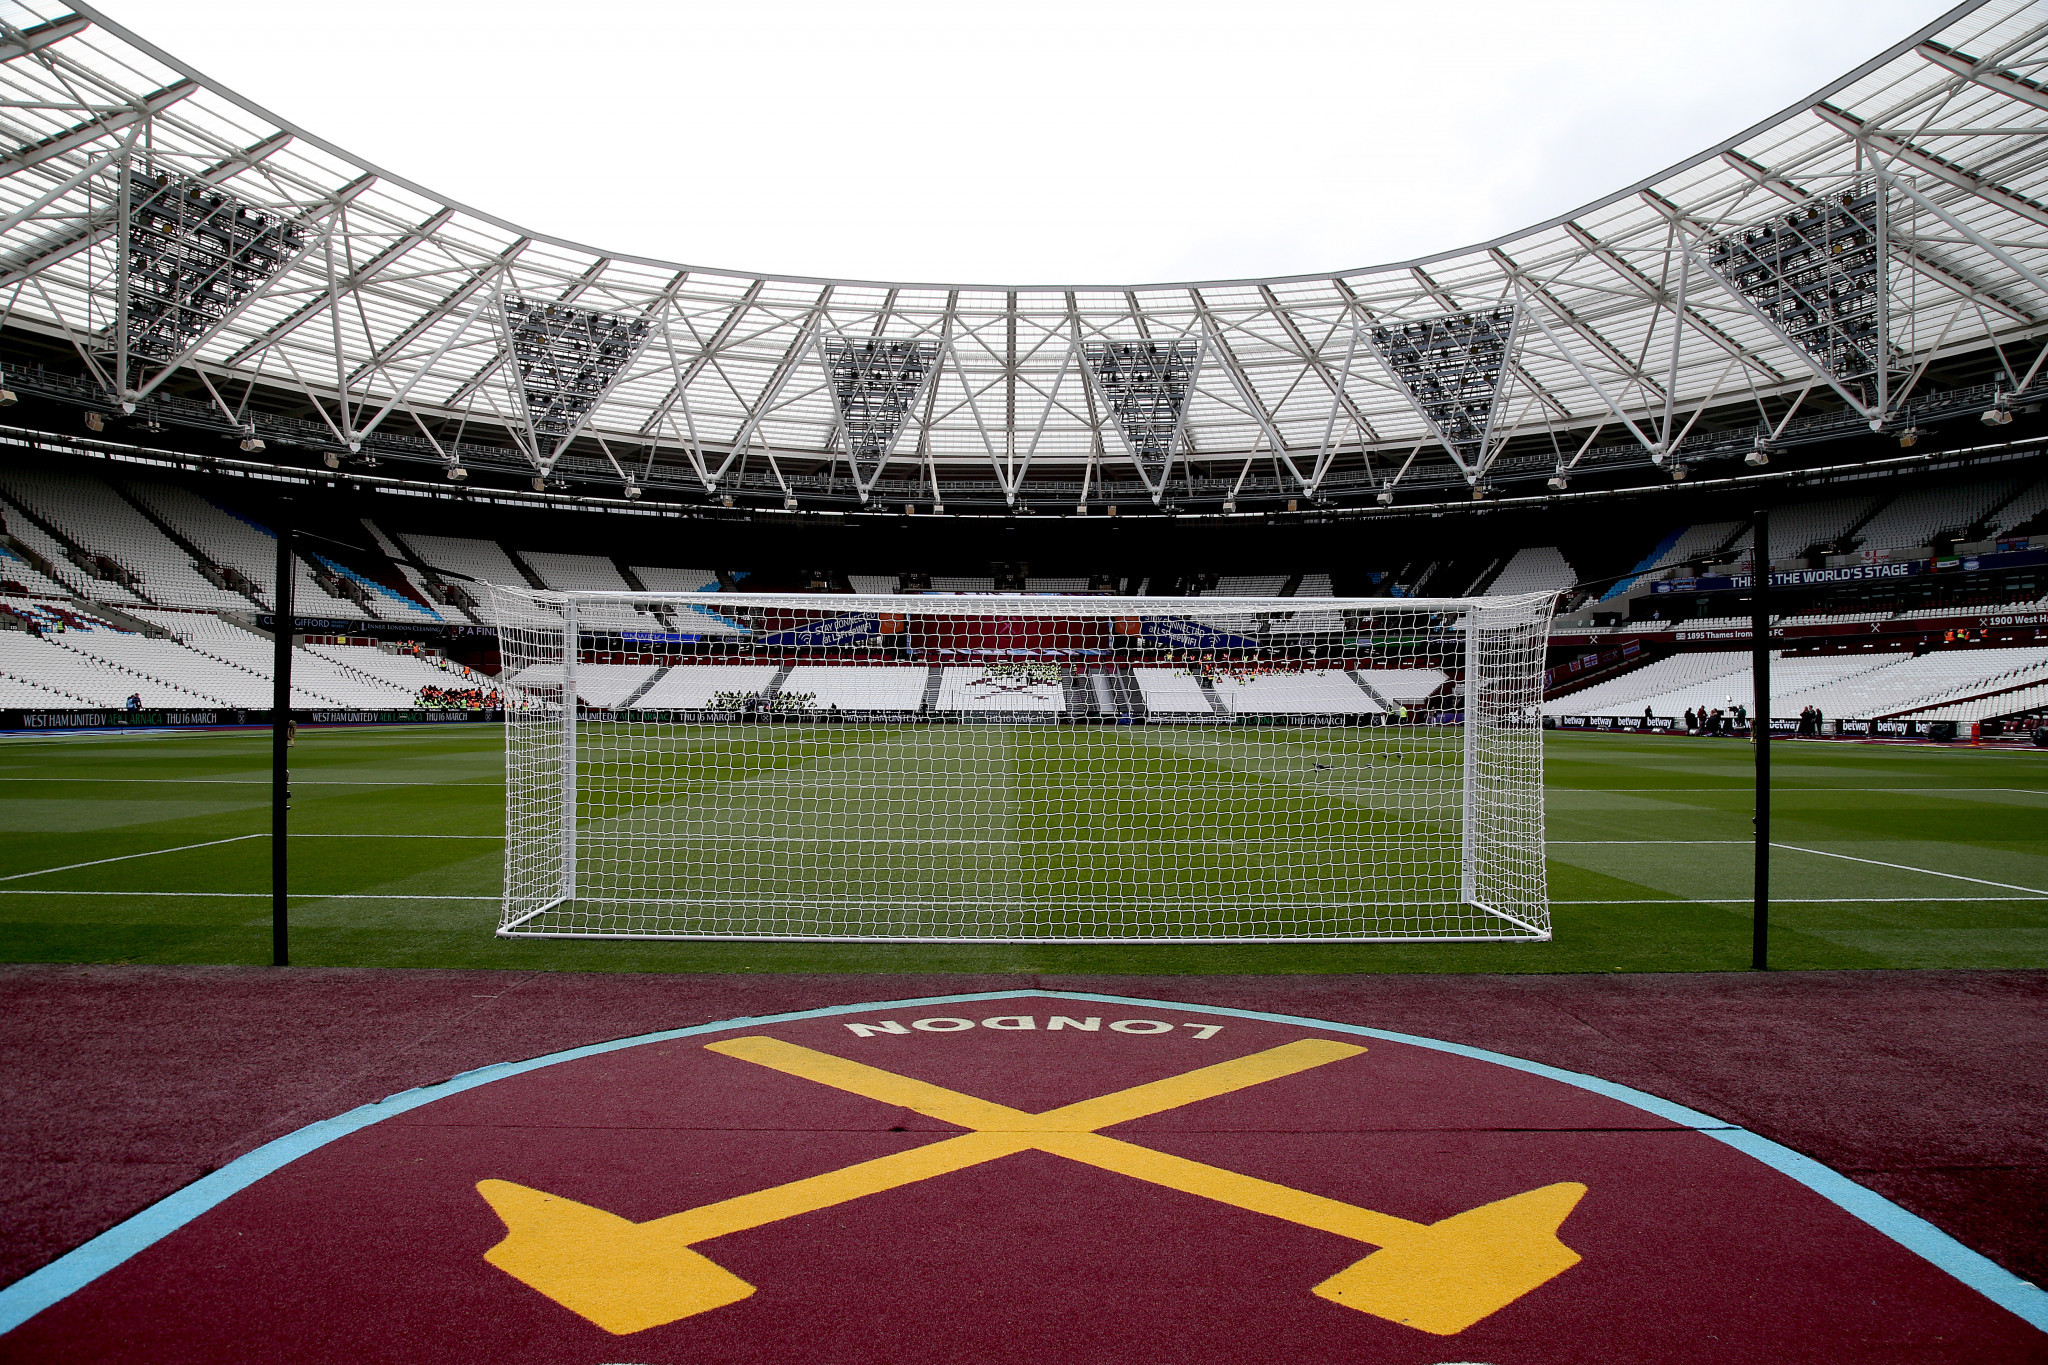 Solar panels could be installed on the London Stadium roof ©Getty Images